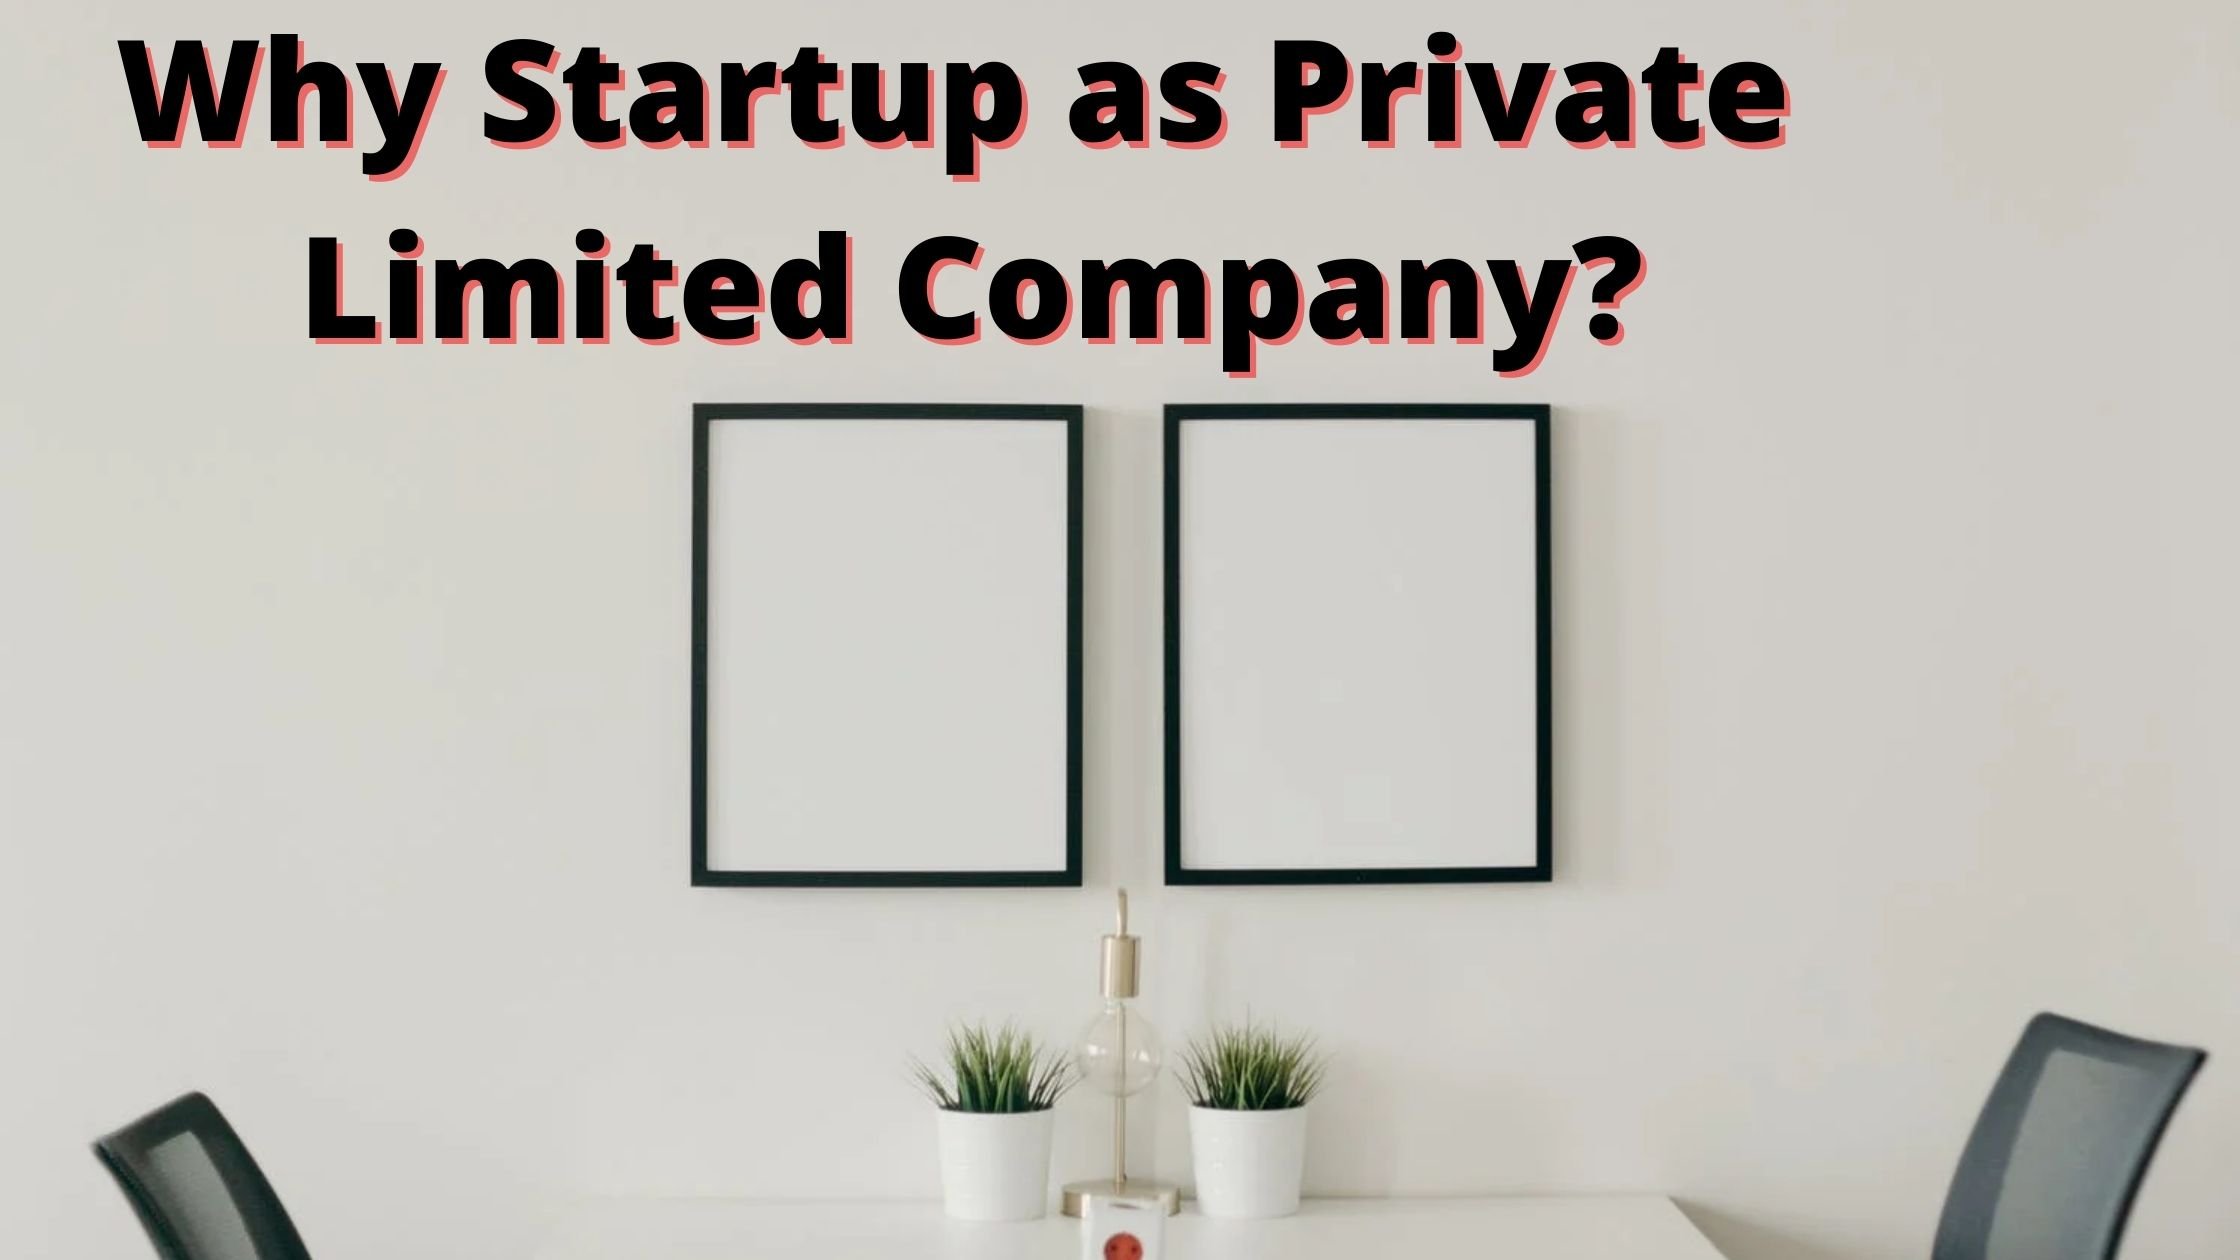 TOP 7 REASONS TO INCORPORATE A STARTUP AS A PRIVATE LIMITED COMPANY 